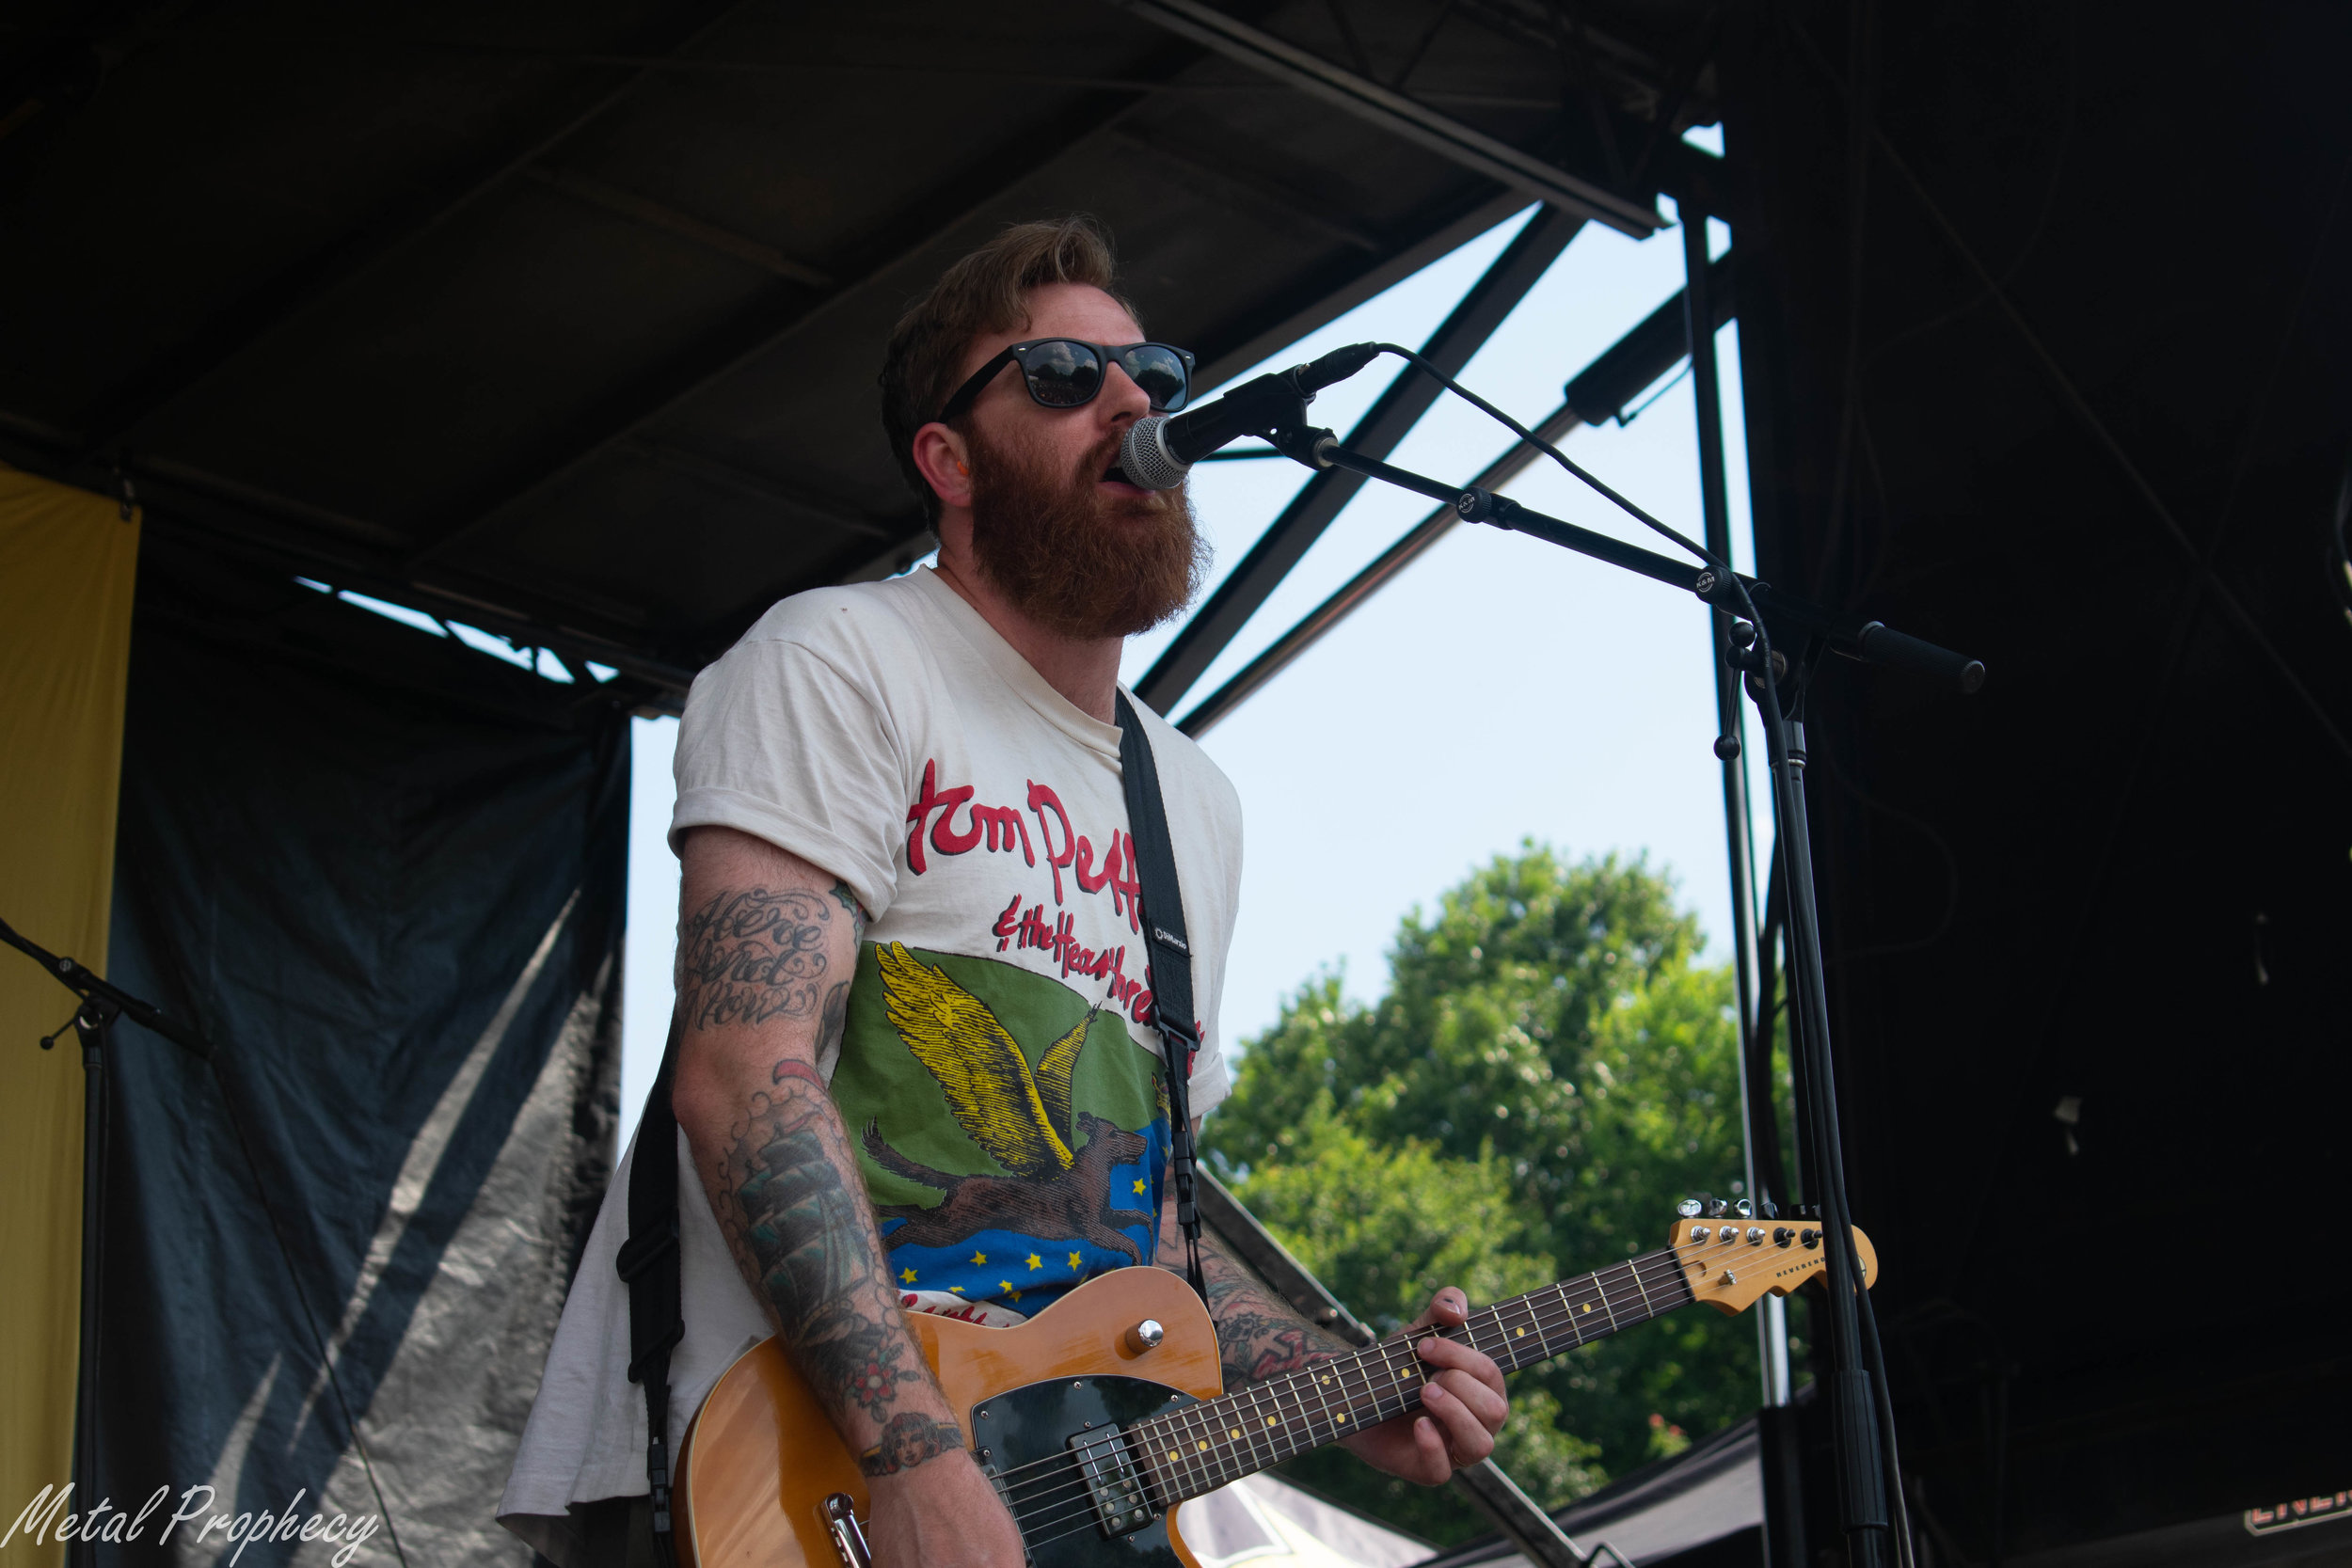 Four Year Strong at Rockstar Energy Disrupt Festival